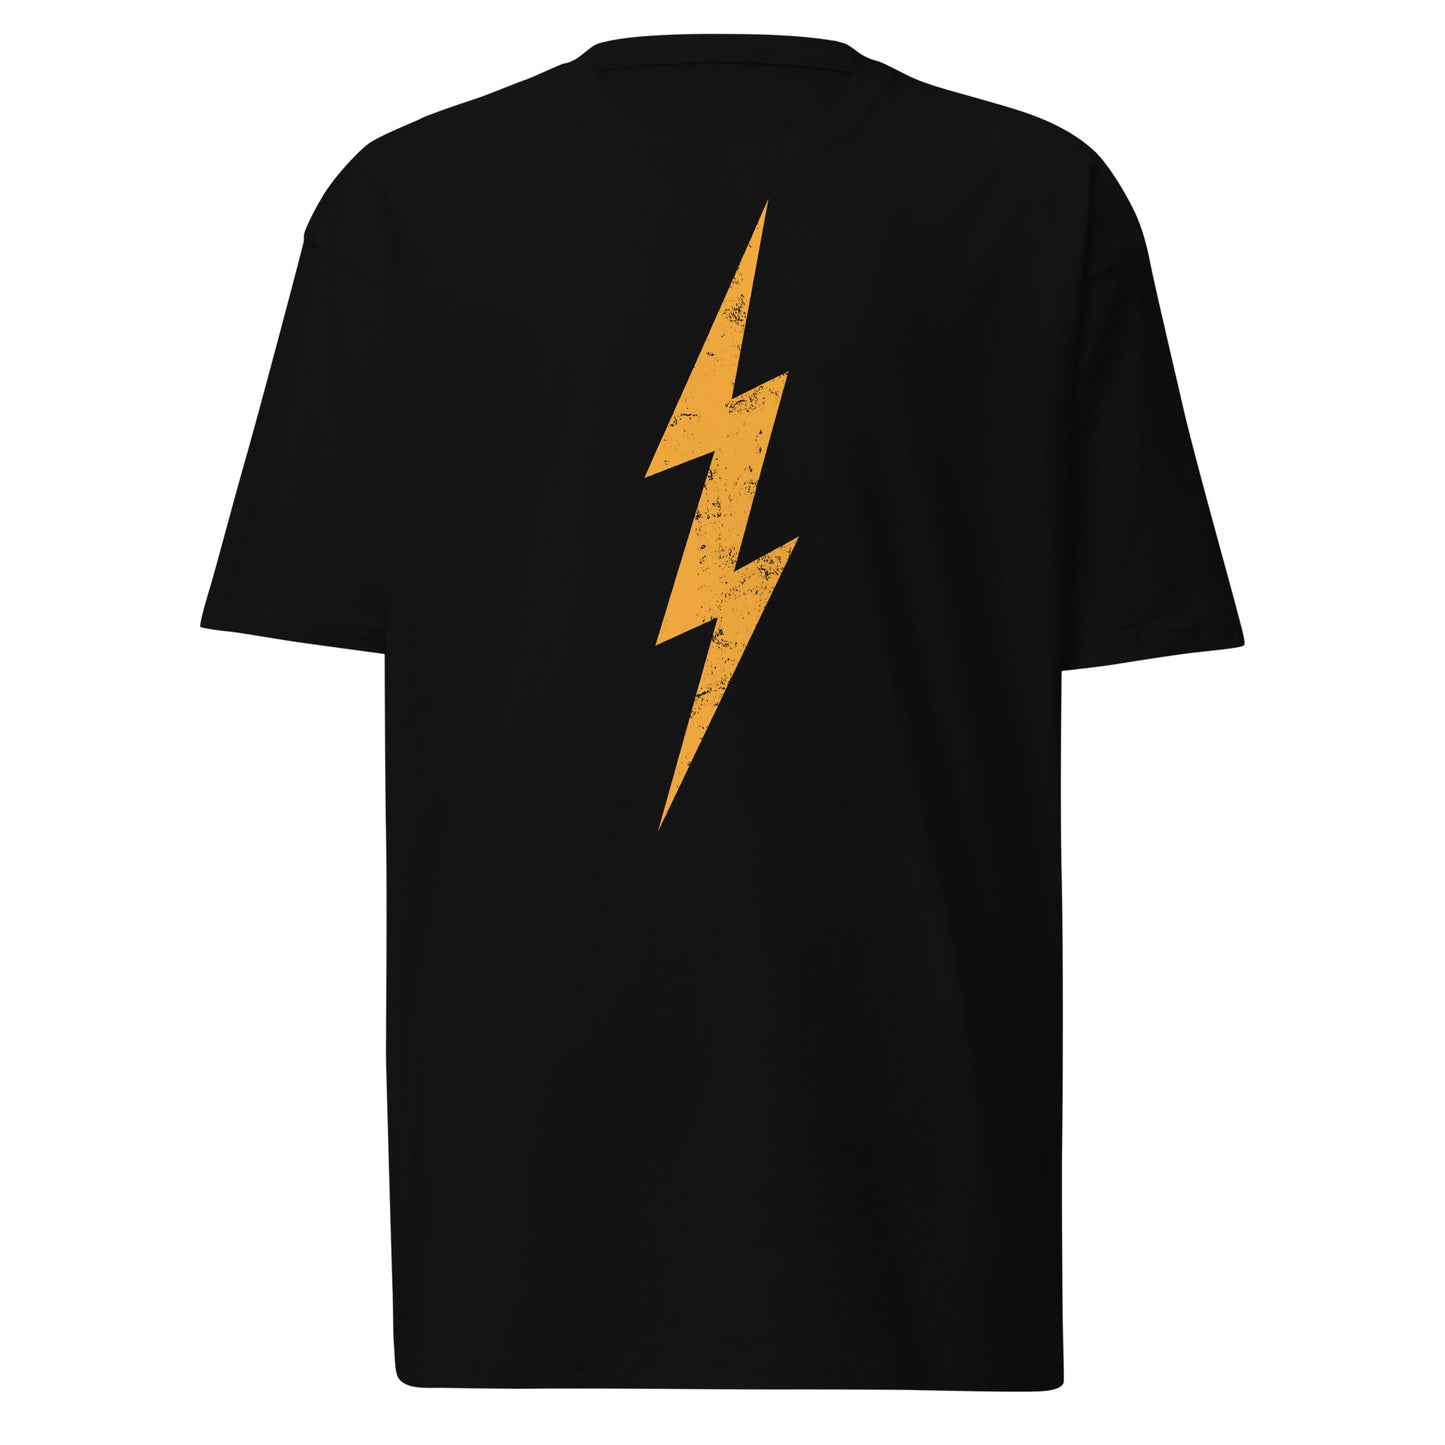 "Lightning Bolt" T-shirt with distressed graphic on black background.